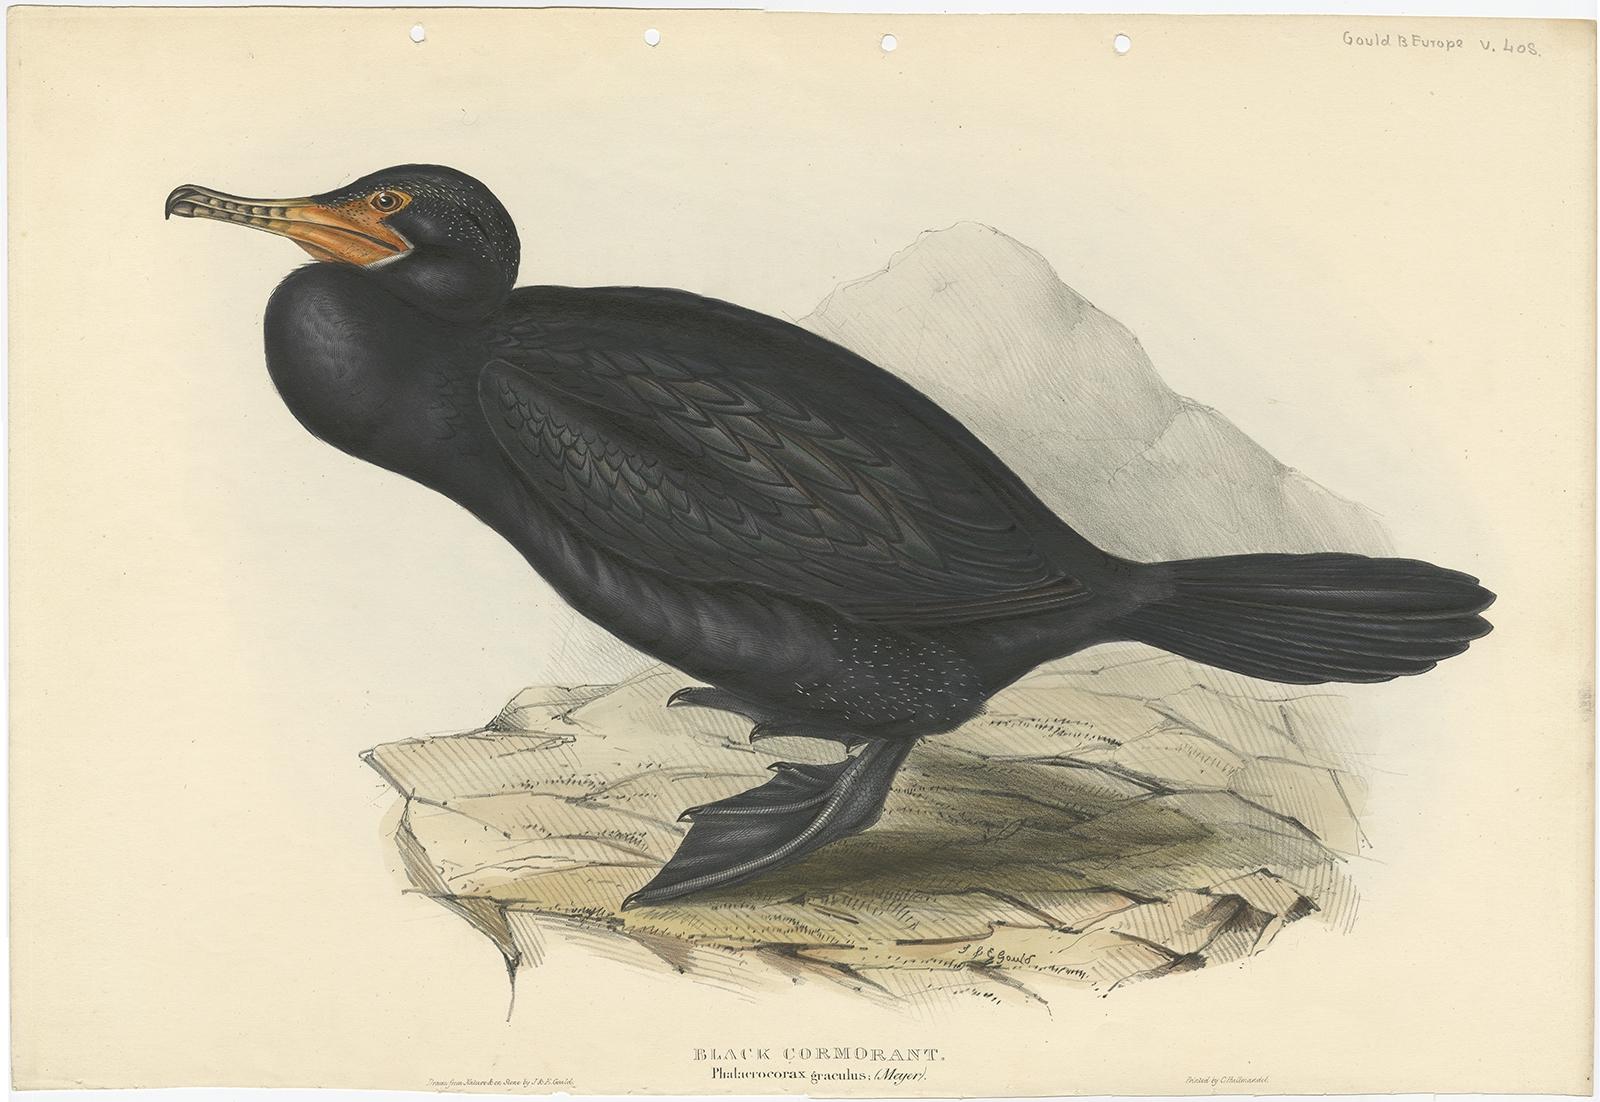 Antique bird print titled 'Black Cormorant'. Old bird print depicting the great cormorant. This print originates from 'Birds of Europe' by J. Gould (1832-1837).

The great cormorant (Phalacrocorax carbo), known as the black shag in New Zealand and